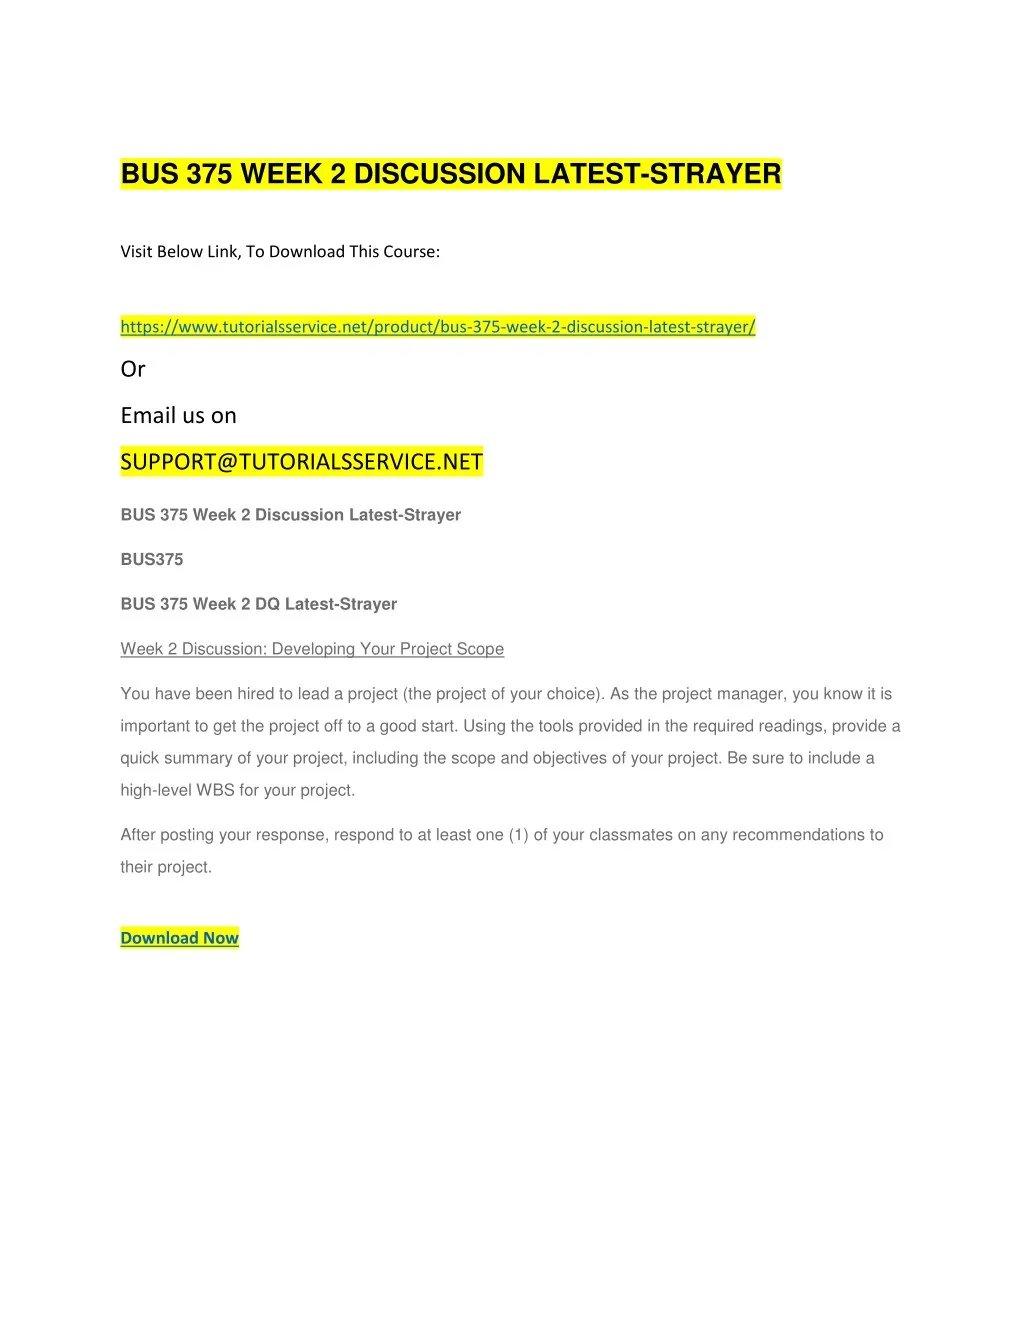 bus 375 week 2 discussion latest strayer